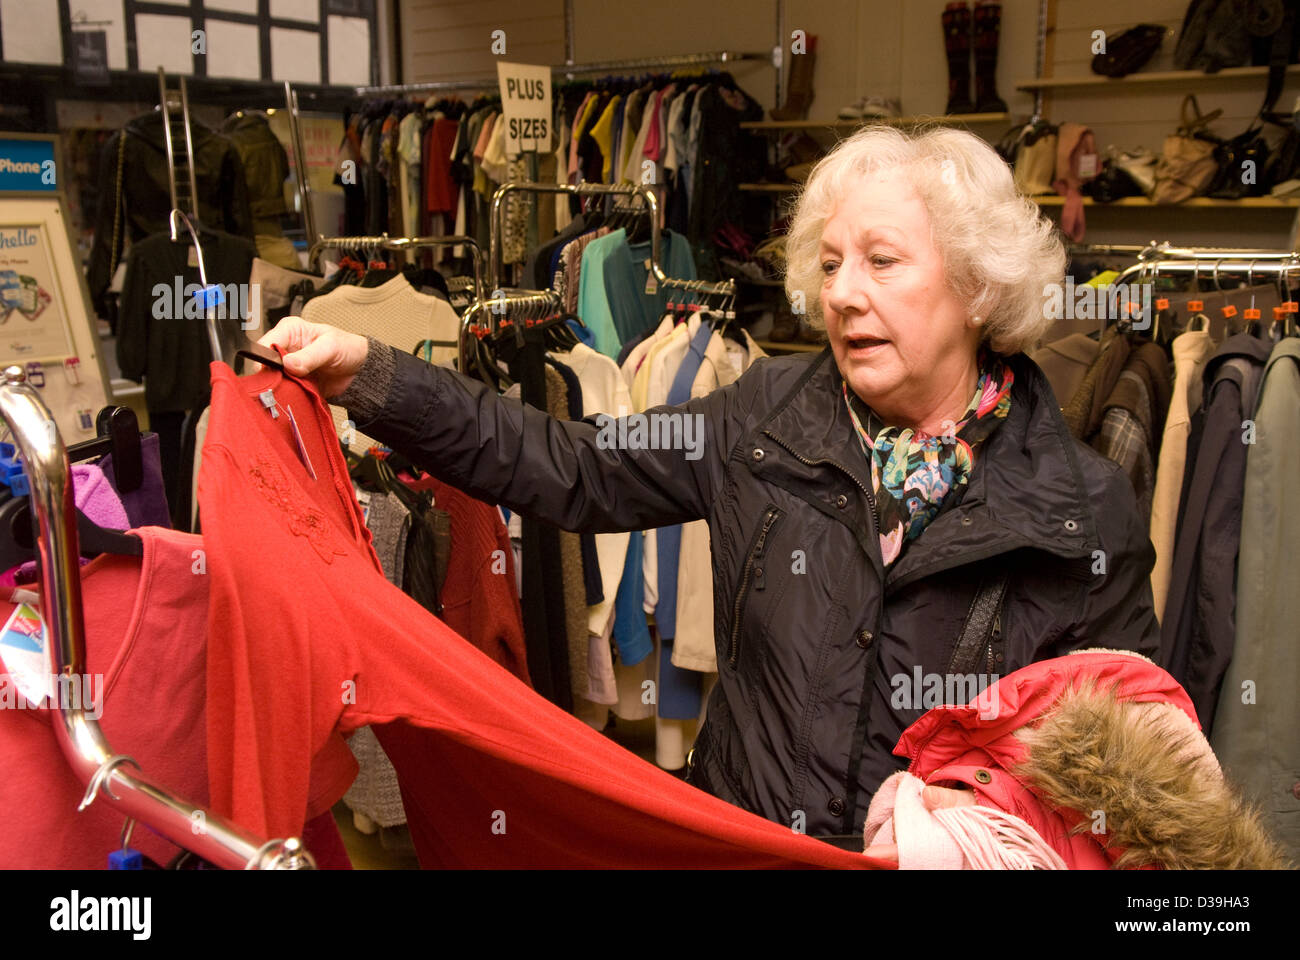 Elderly woman browsing clothing items on display in a charity shop, Godalming, Surrey, UK. Stock Photo